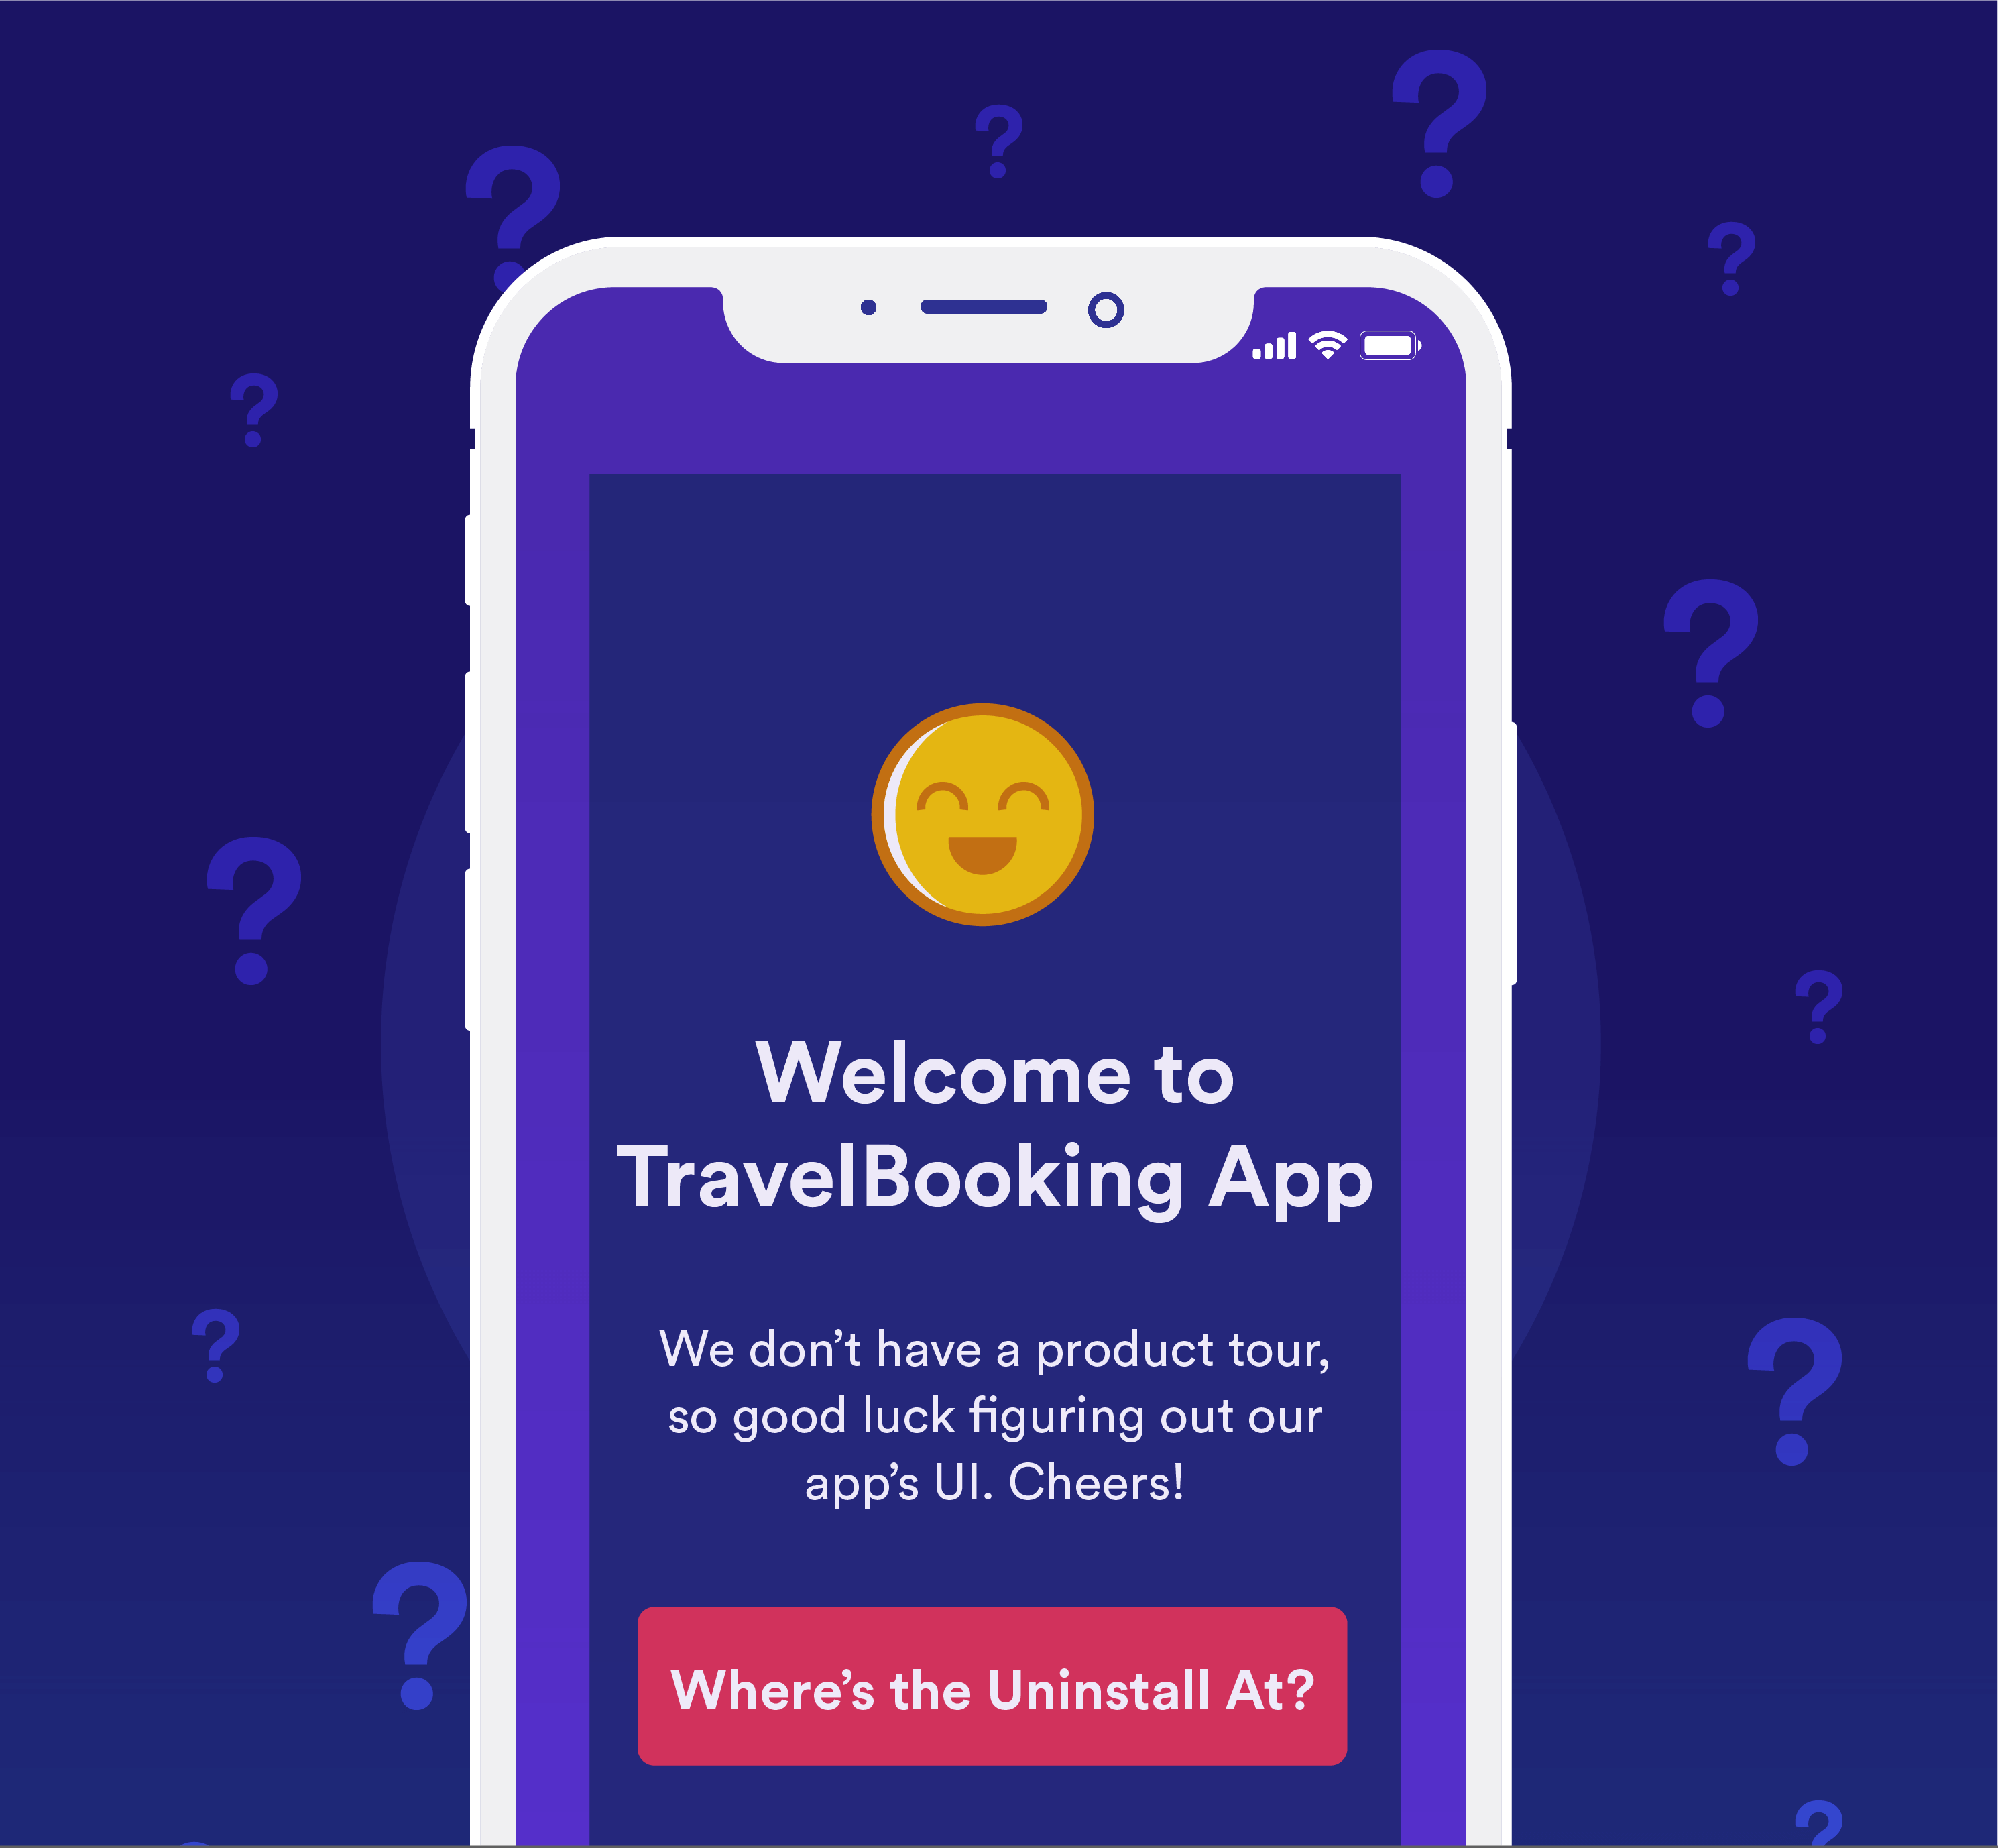 Welcome to TravelBooking App. We don’t have a product tour, so good luck figuring out our app’s UI